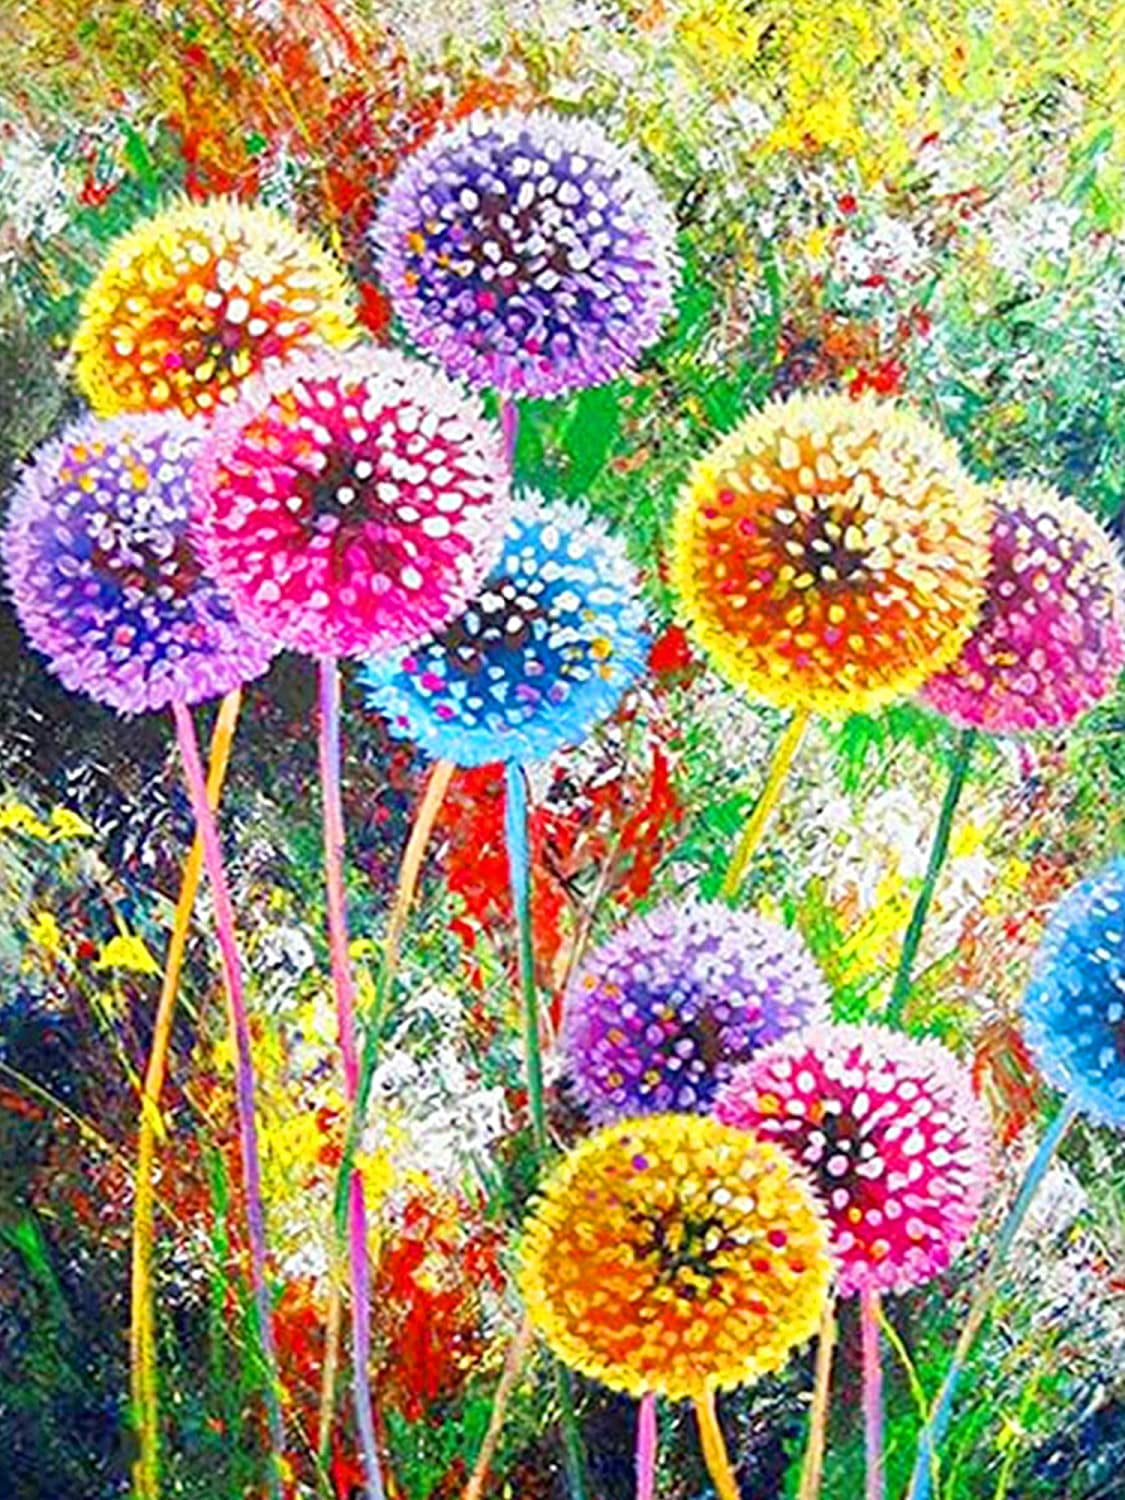 Diamond Painting by Numbers-Dandelion 5D Diamond Painting Kits for Adults,Full Drill Diamond Arts Craft Crystal Rhineston Paintings with Diamonds dotz Painting Accessories Tools 